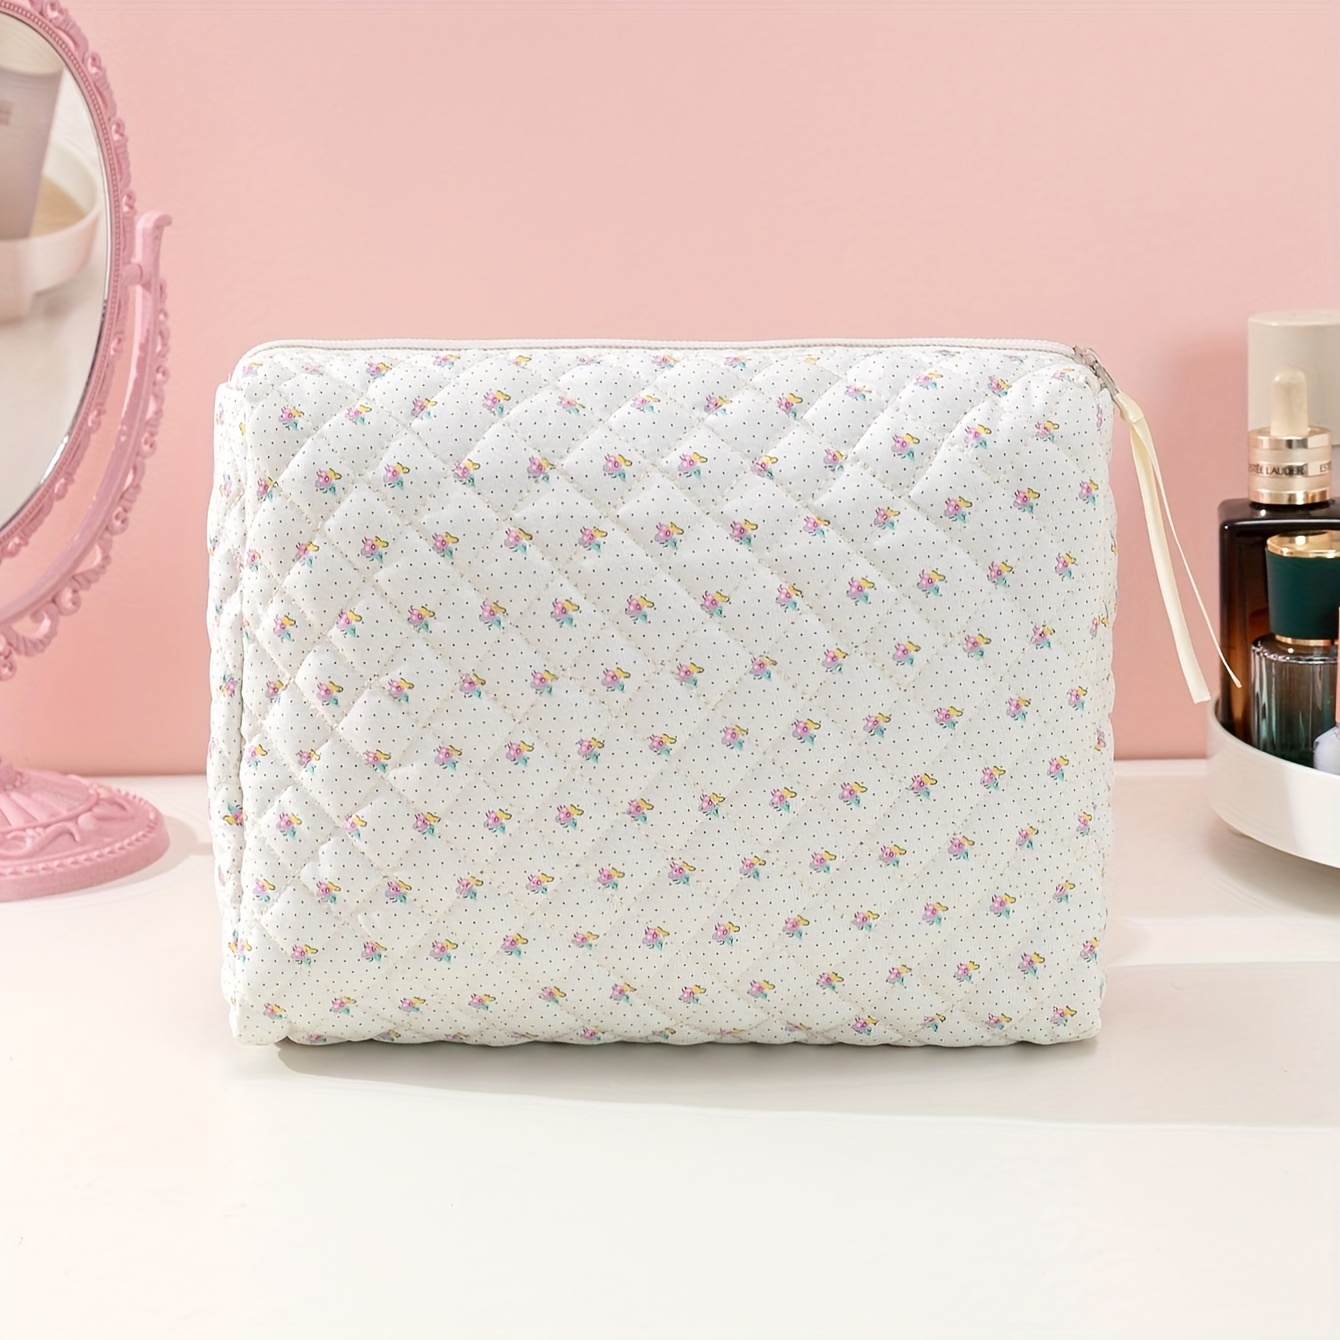 Quilted Lipstick Storage Bag Zipper Pink, Cosmetic Bag, Organizer